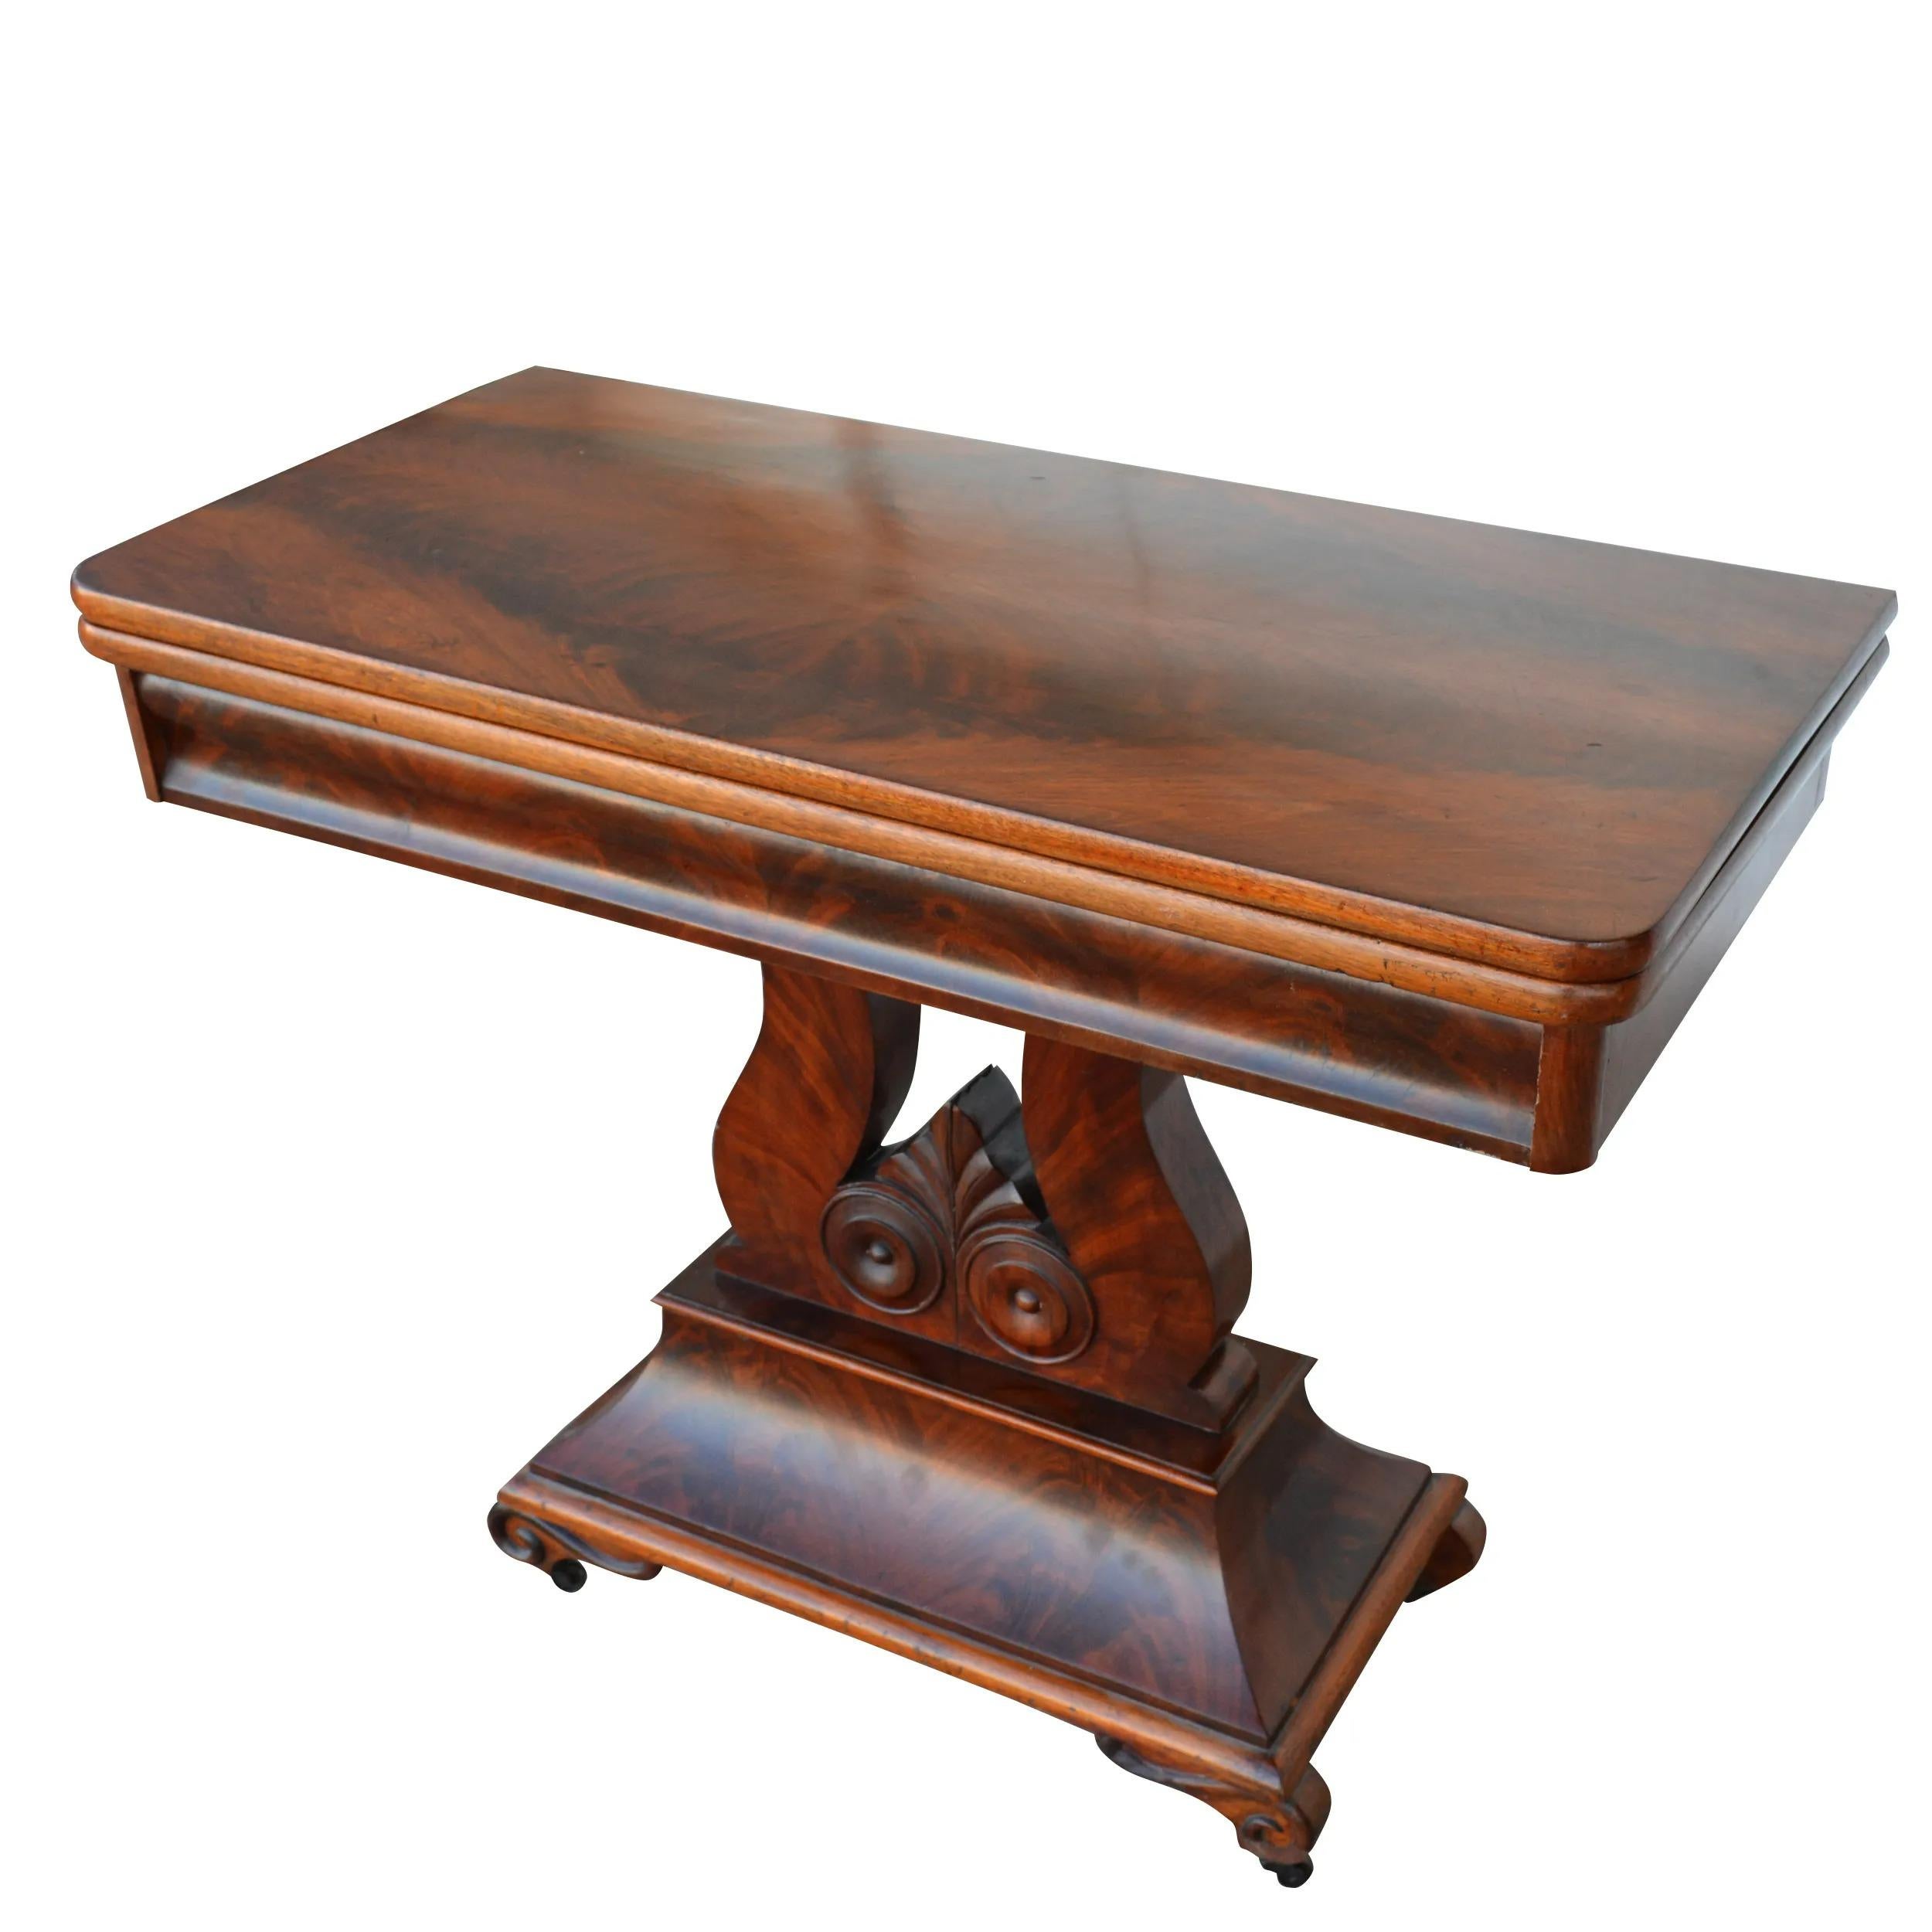 Regency style Mahogany Lyre base game table

Rich Flame mahogany on a stepped harp lyre base. When closed can serve as a console and open as a dining or gaming table. 

Measures 37